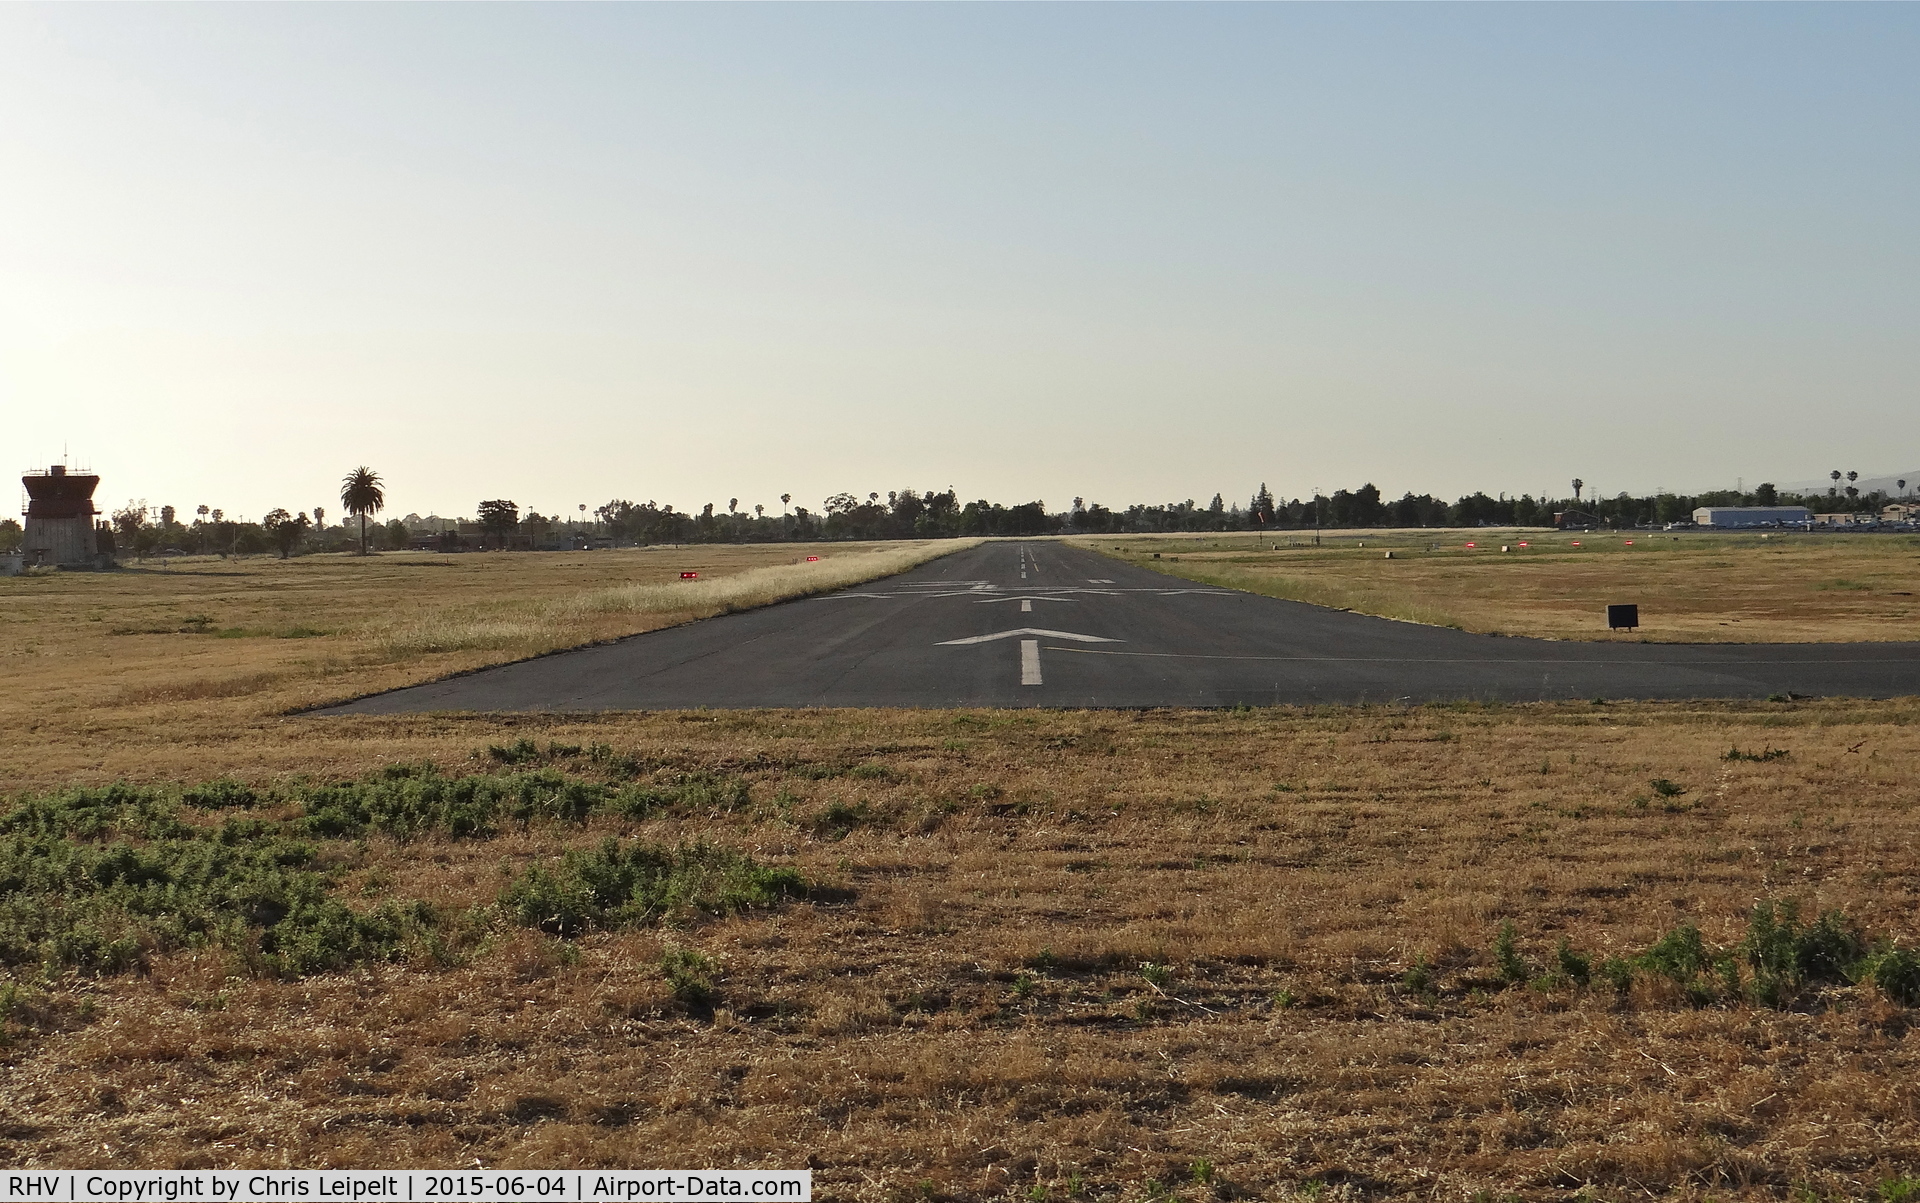 Reid-hillview Of Santa Clara County Airport (RHV) - An overview of runway 31L and the surrounding area at Reid Hillview Airport, CA.